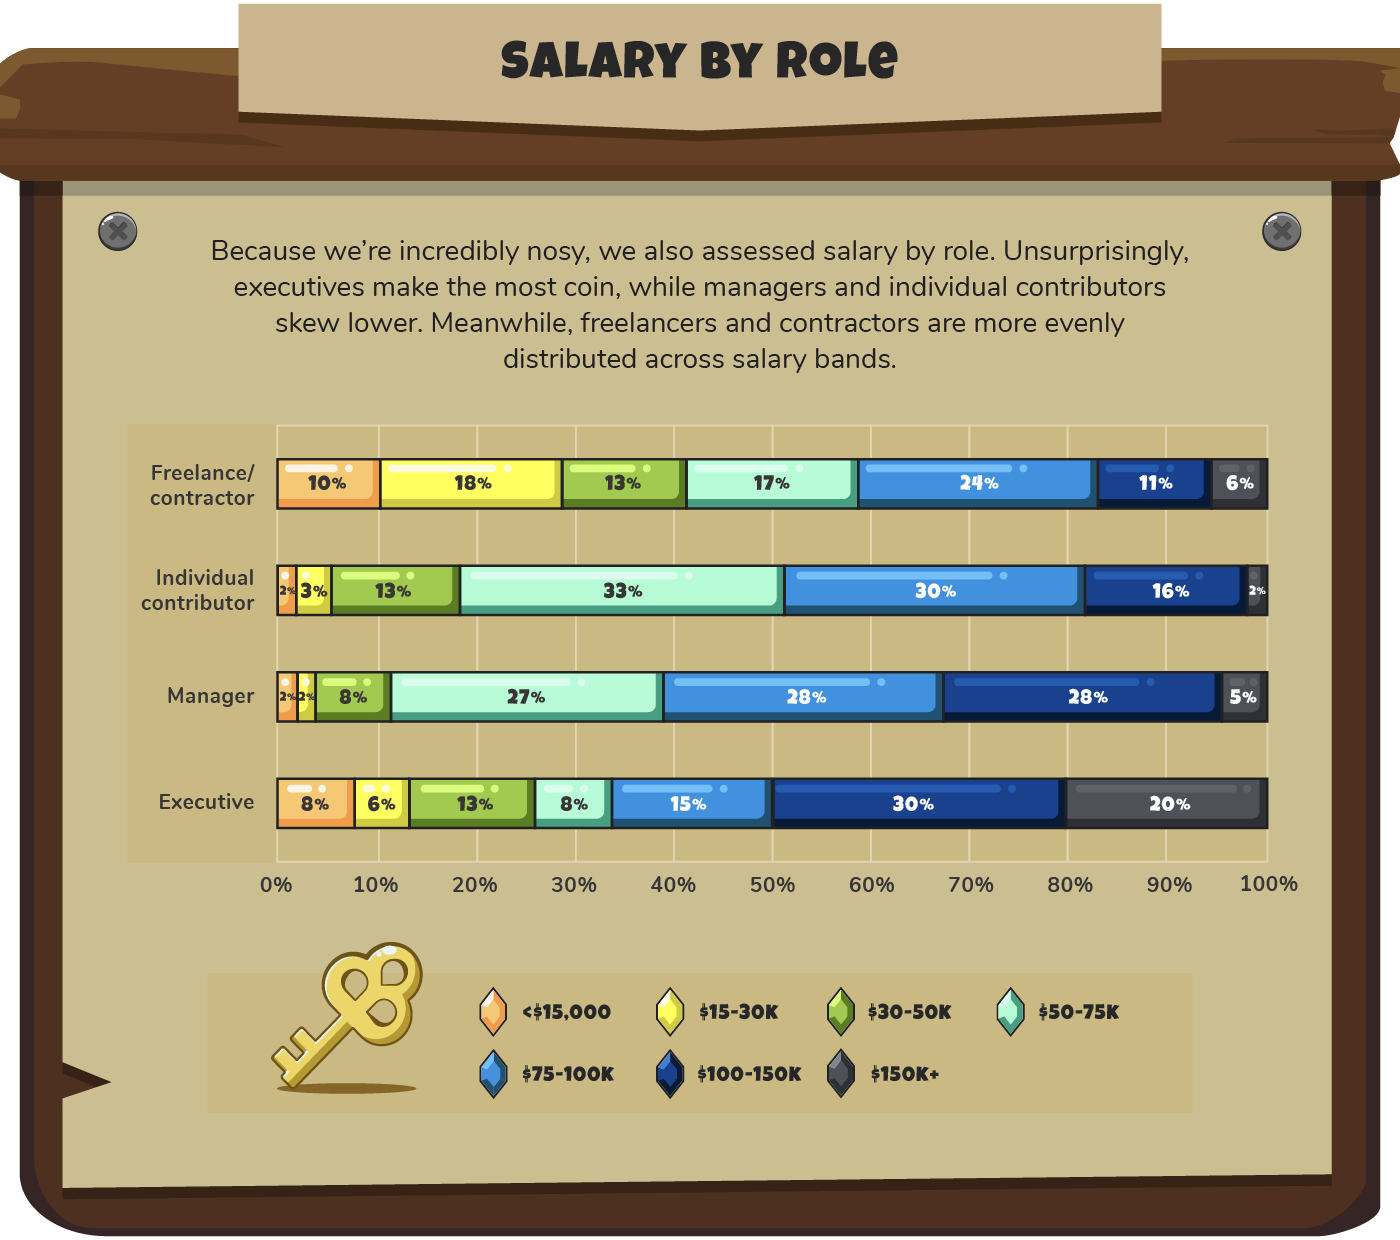 Salary by role